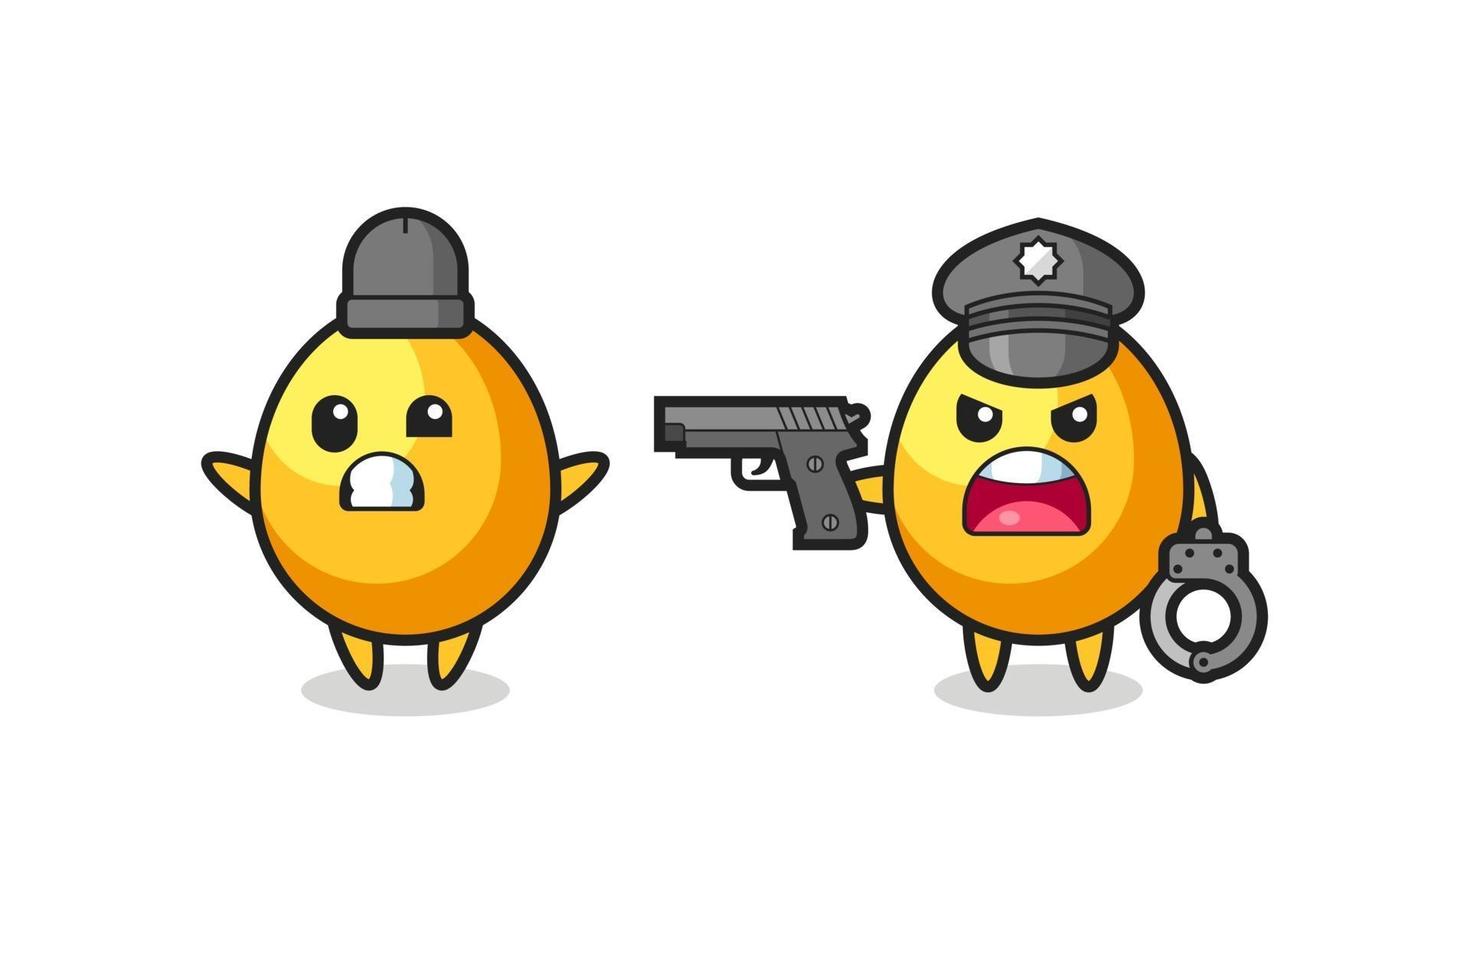 illustration of golden egg robber with hands up pose caught by police vector